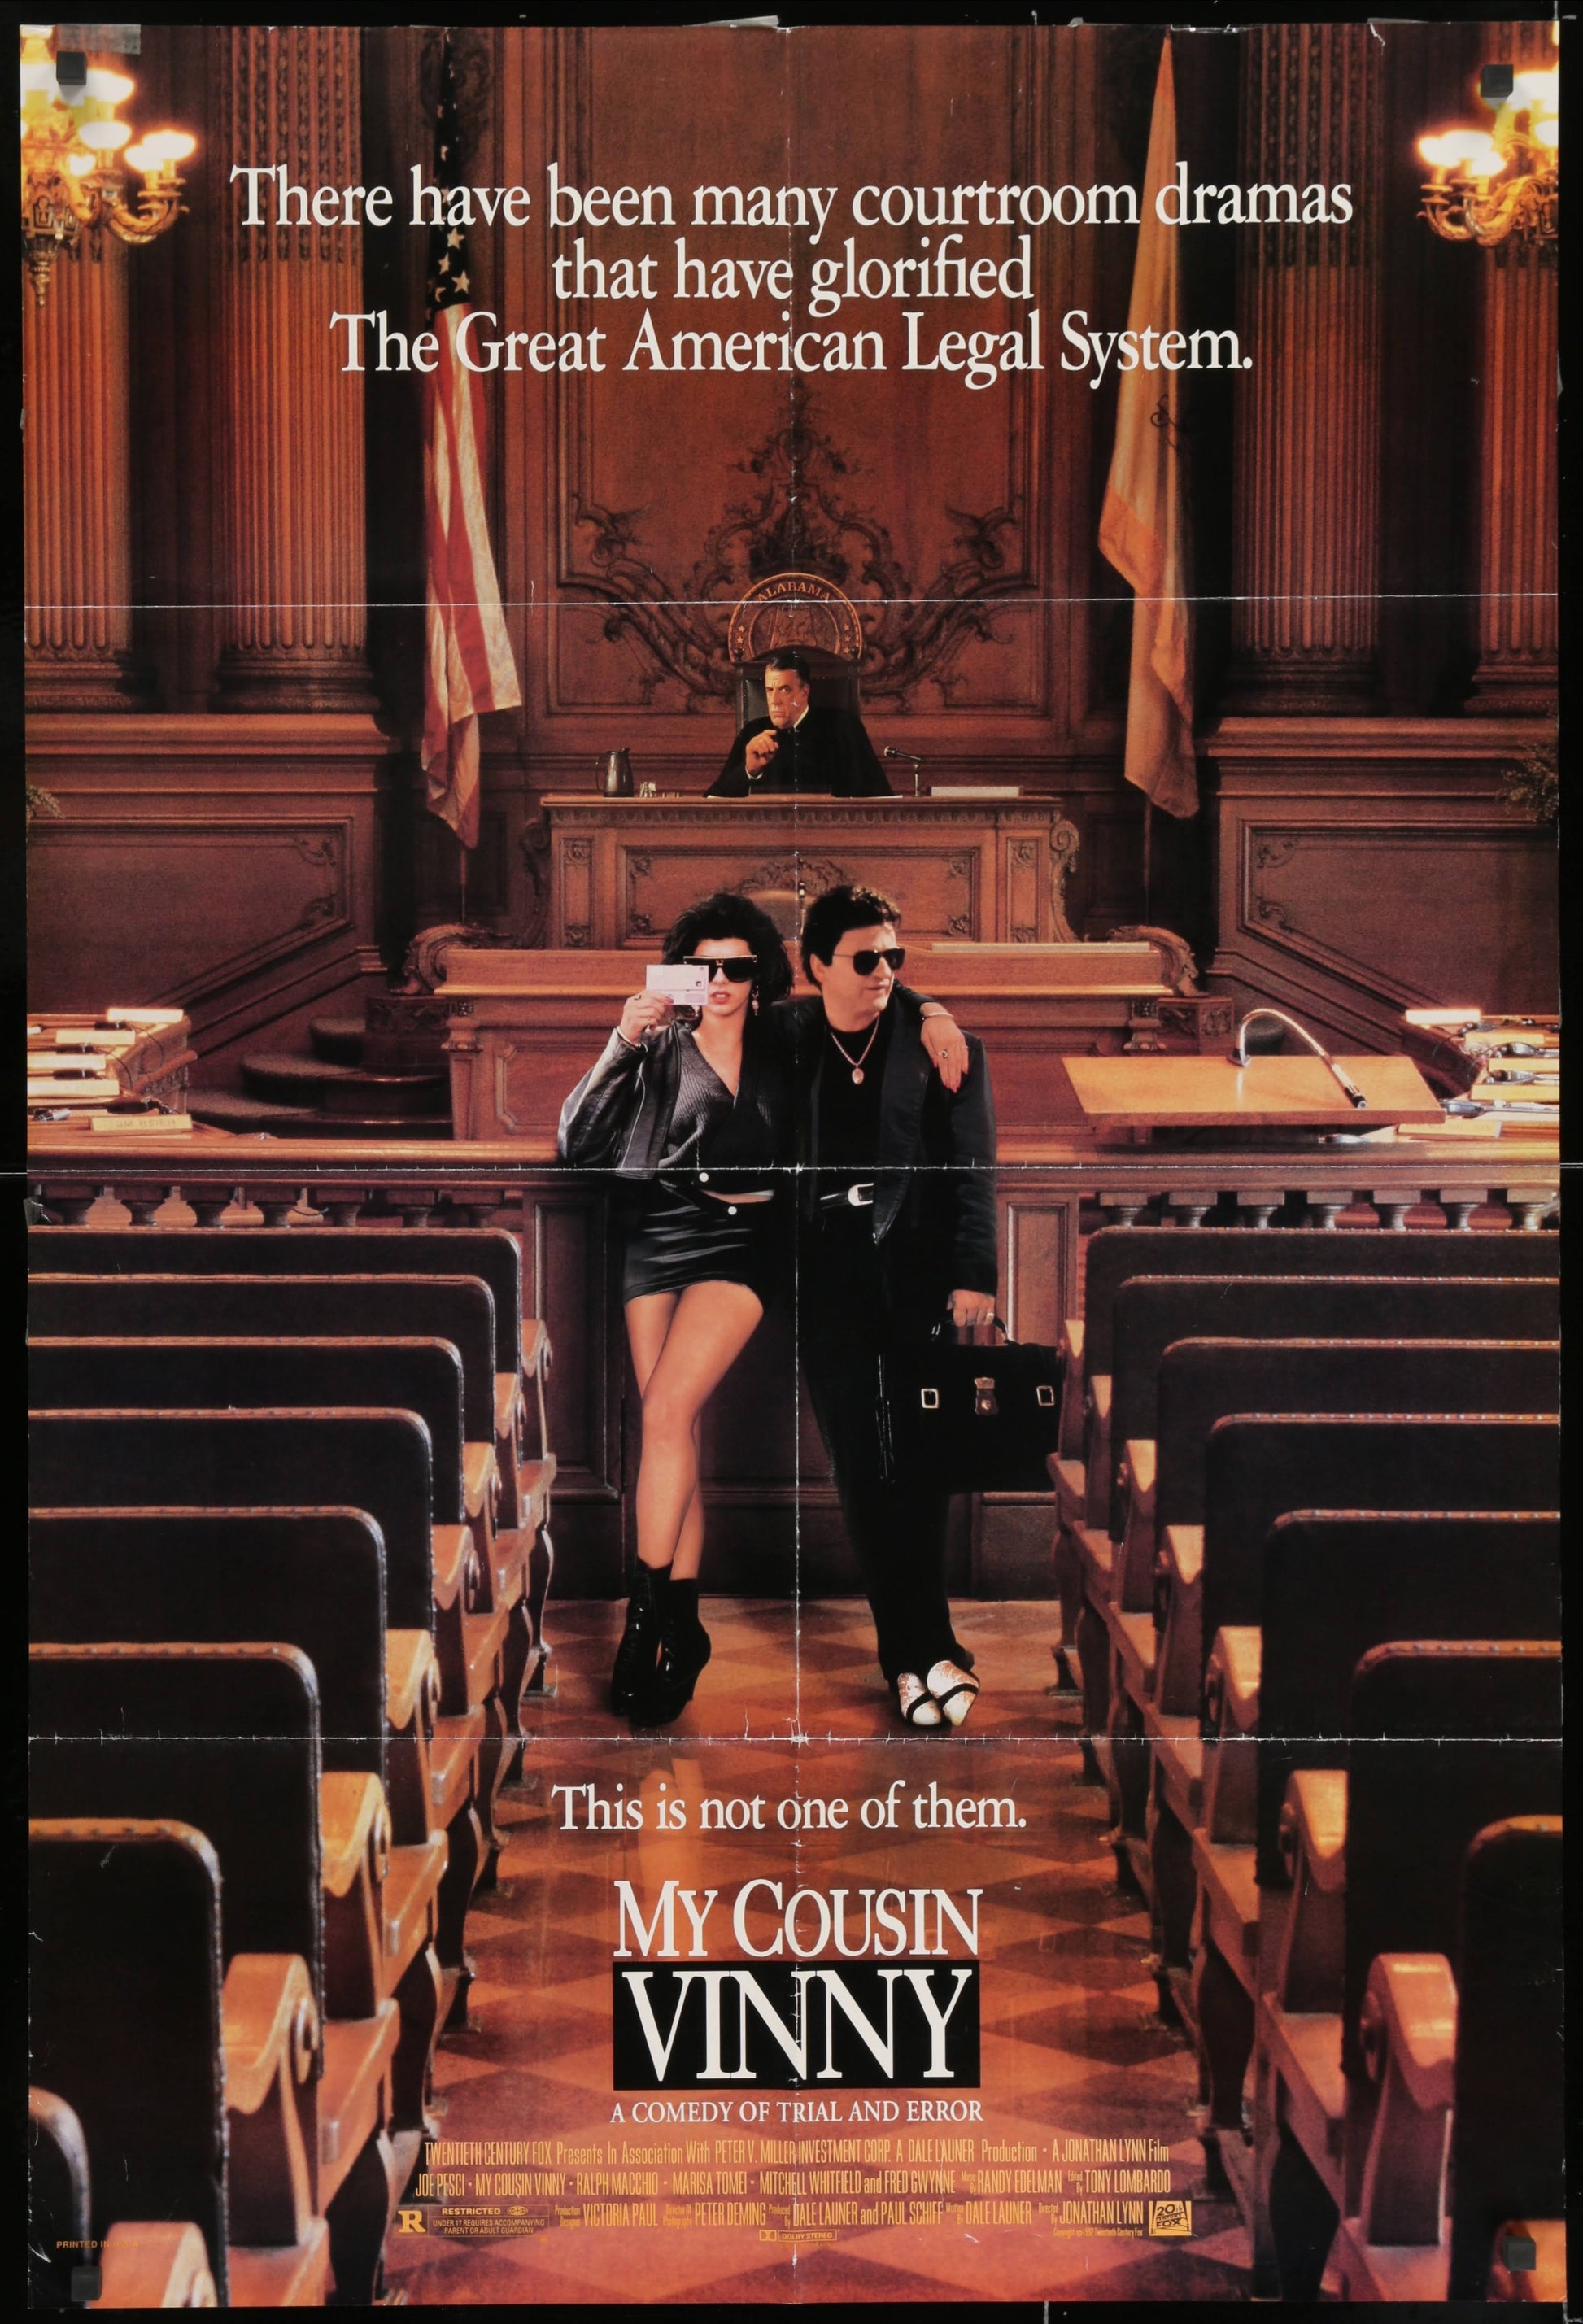 My Cousin Vinny US One Sheet (1992) - ORIGINAL RELEASE - posterpalace.com